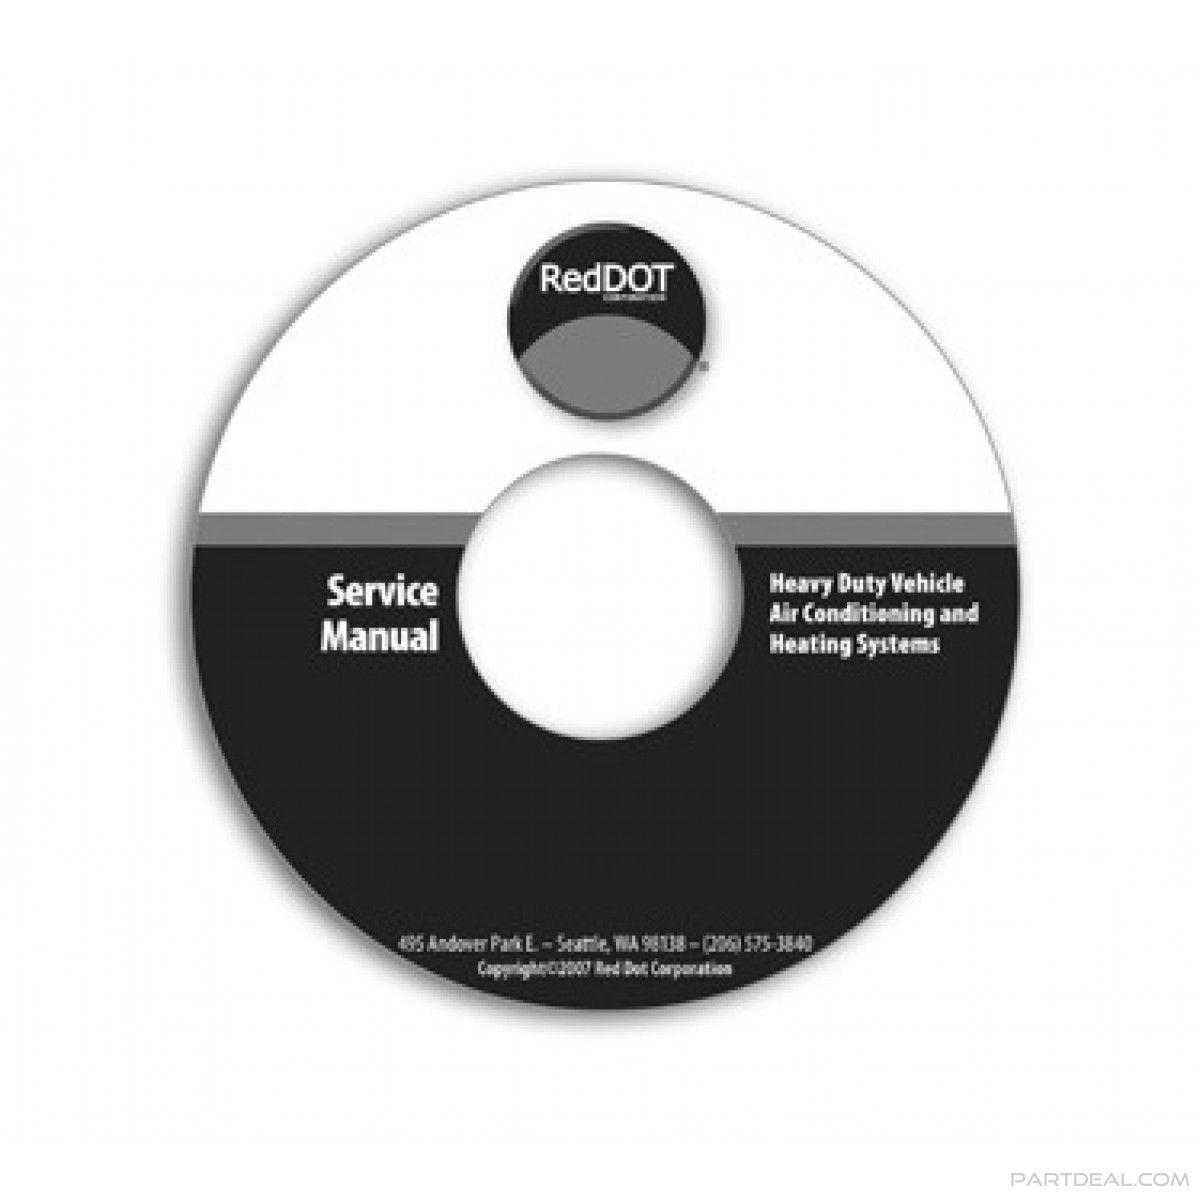 Red Dot Corp Logo - Red Dot-Red Dot Air Conditioning Service Manual - 79R5901 - RD-5 ...